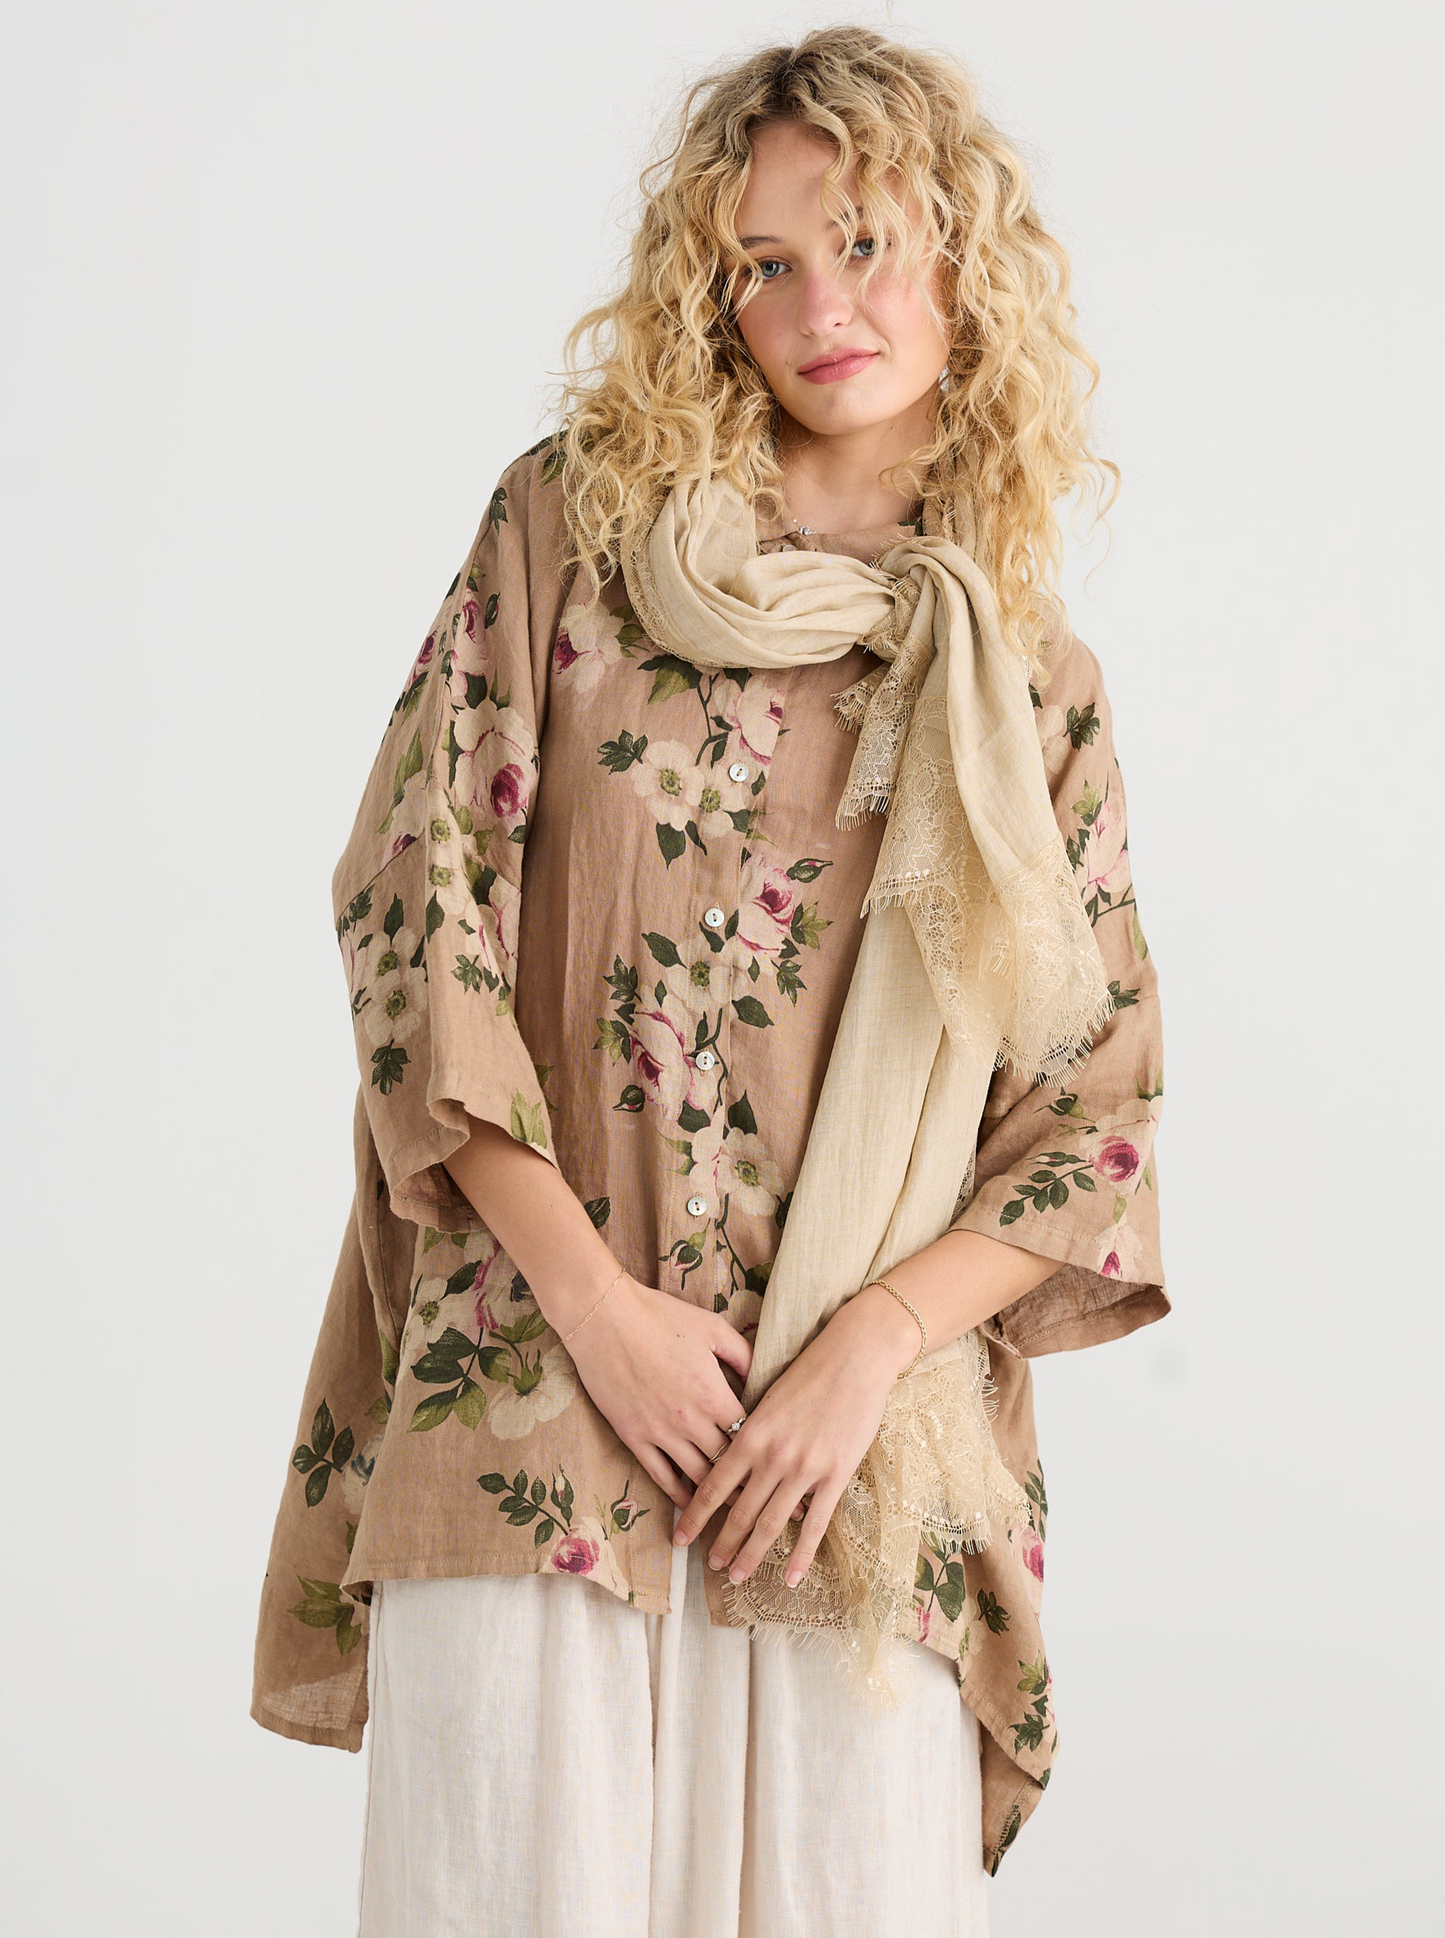 Midsummer`s Dream cotton and lace scarf. Oatmilk